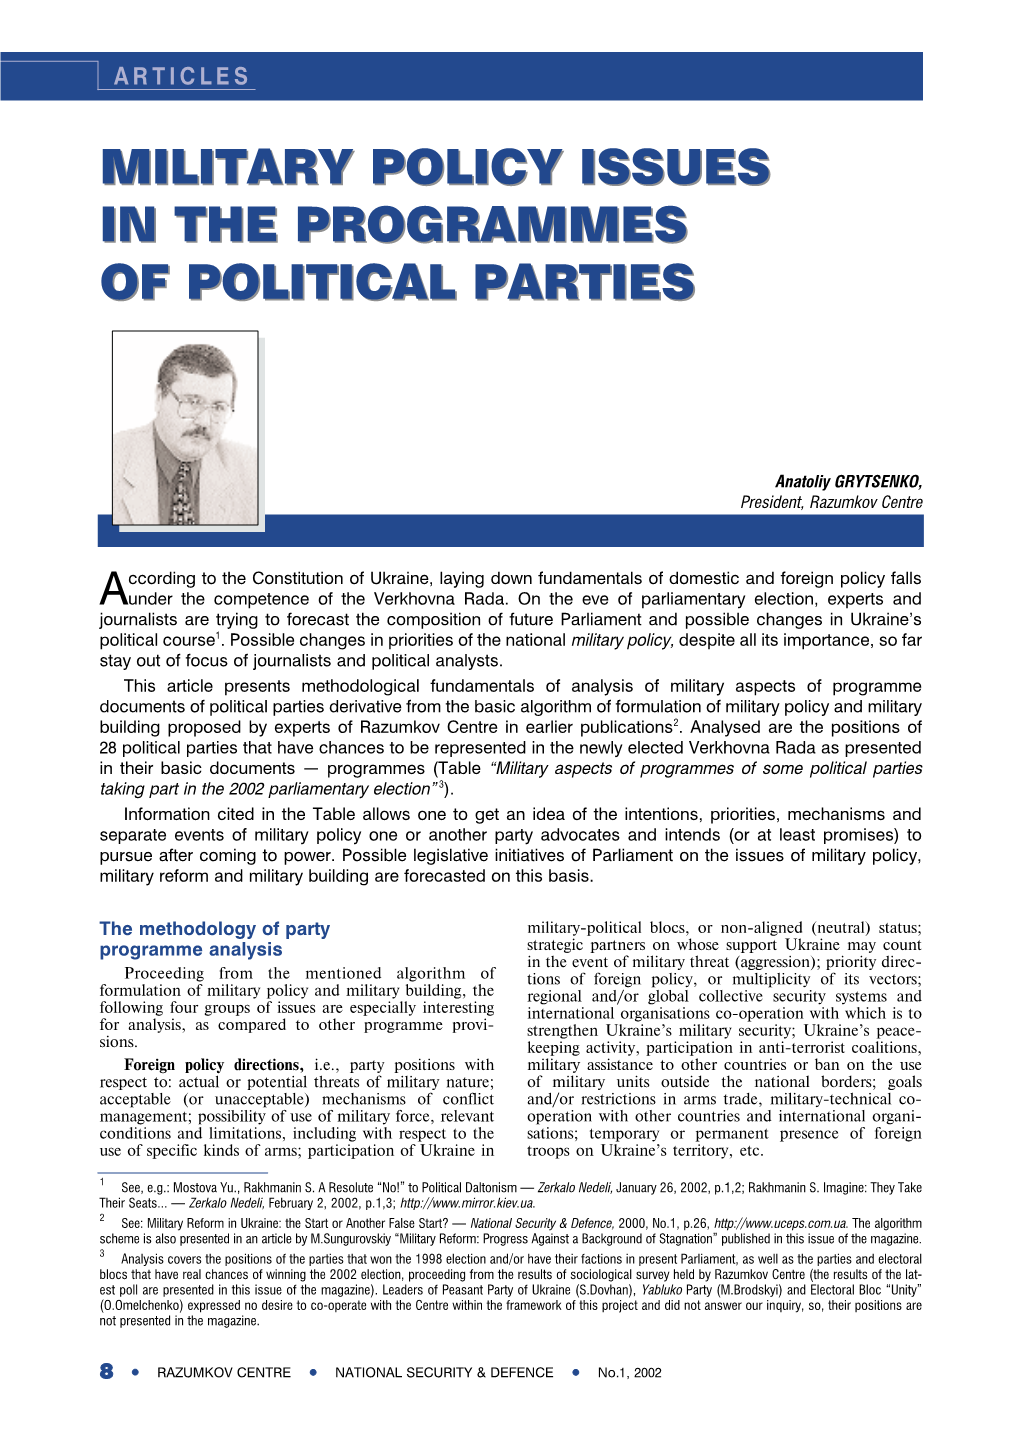 Military Policy Issues in the Programmes of Political